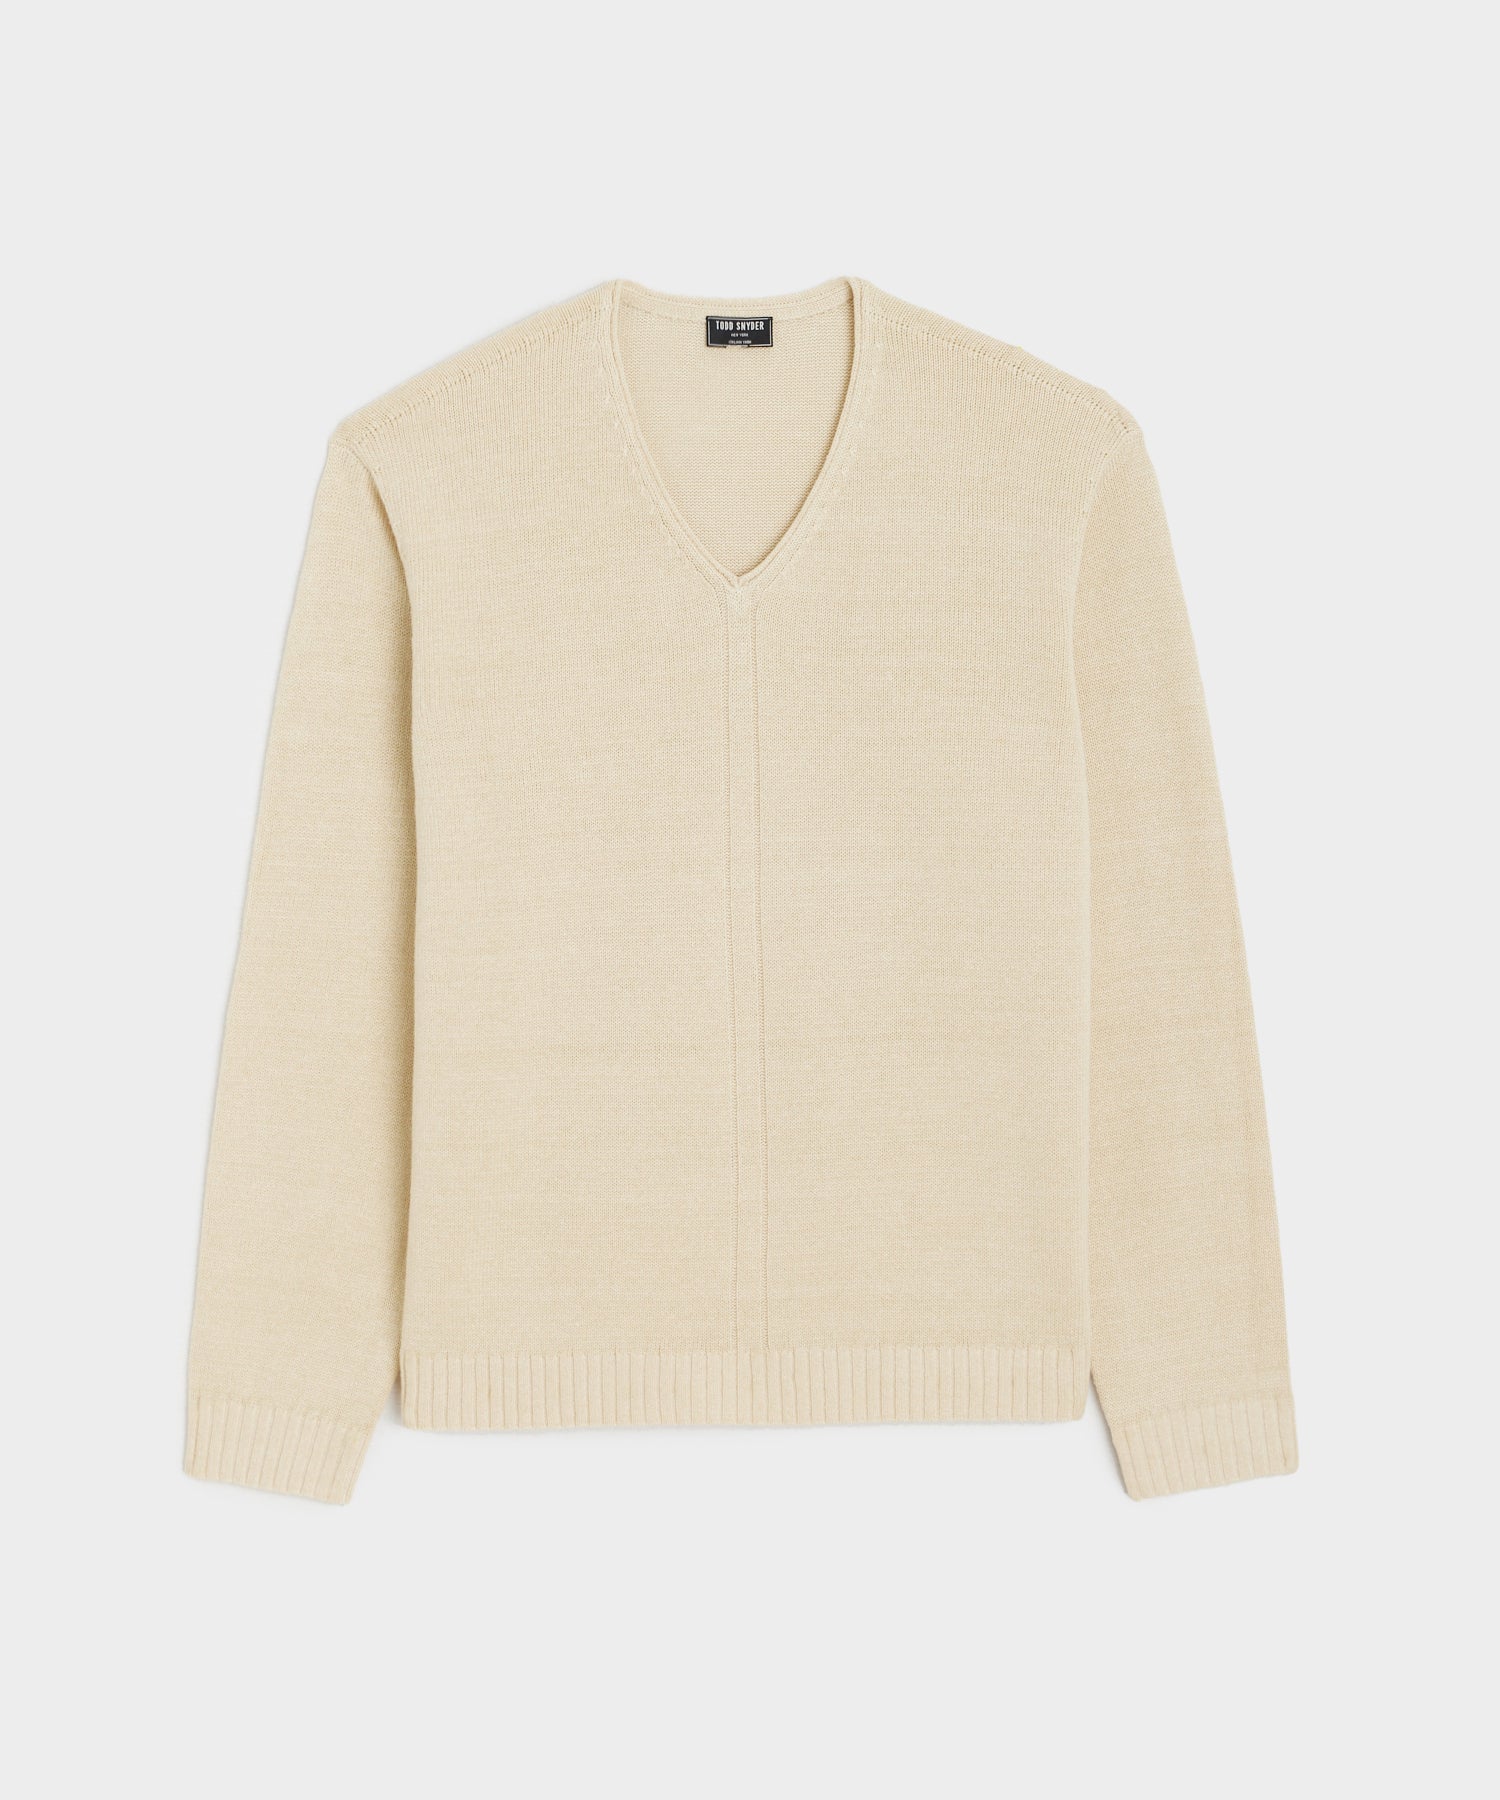 Linen Cotton V-Neck Sweater in Bisque